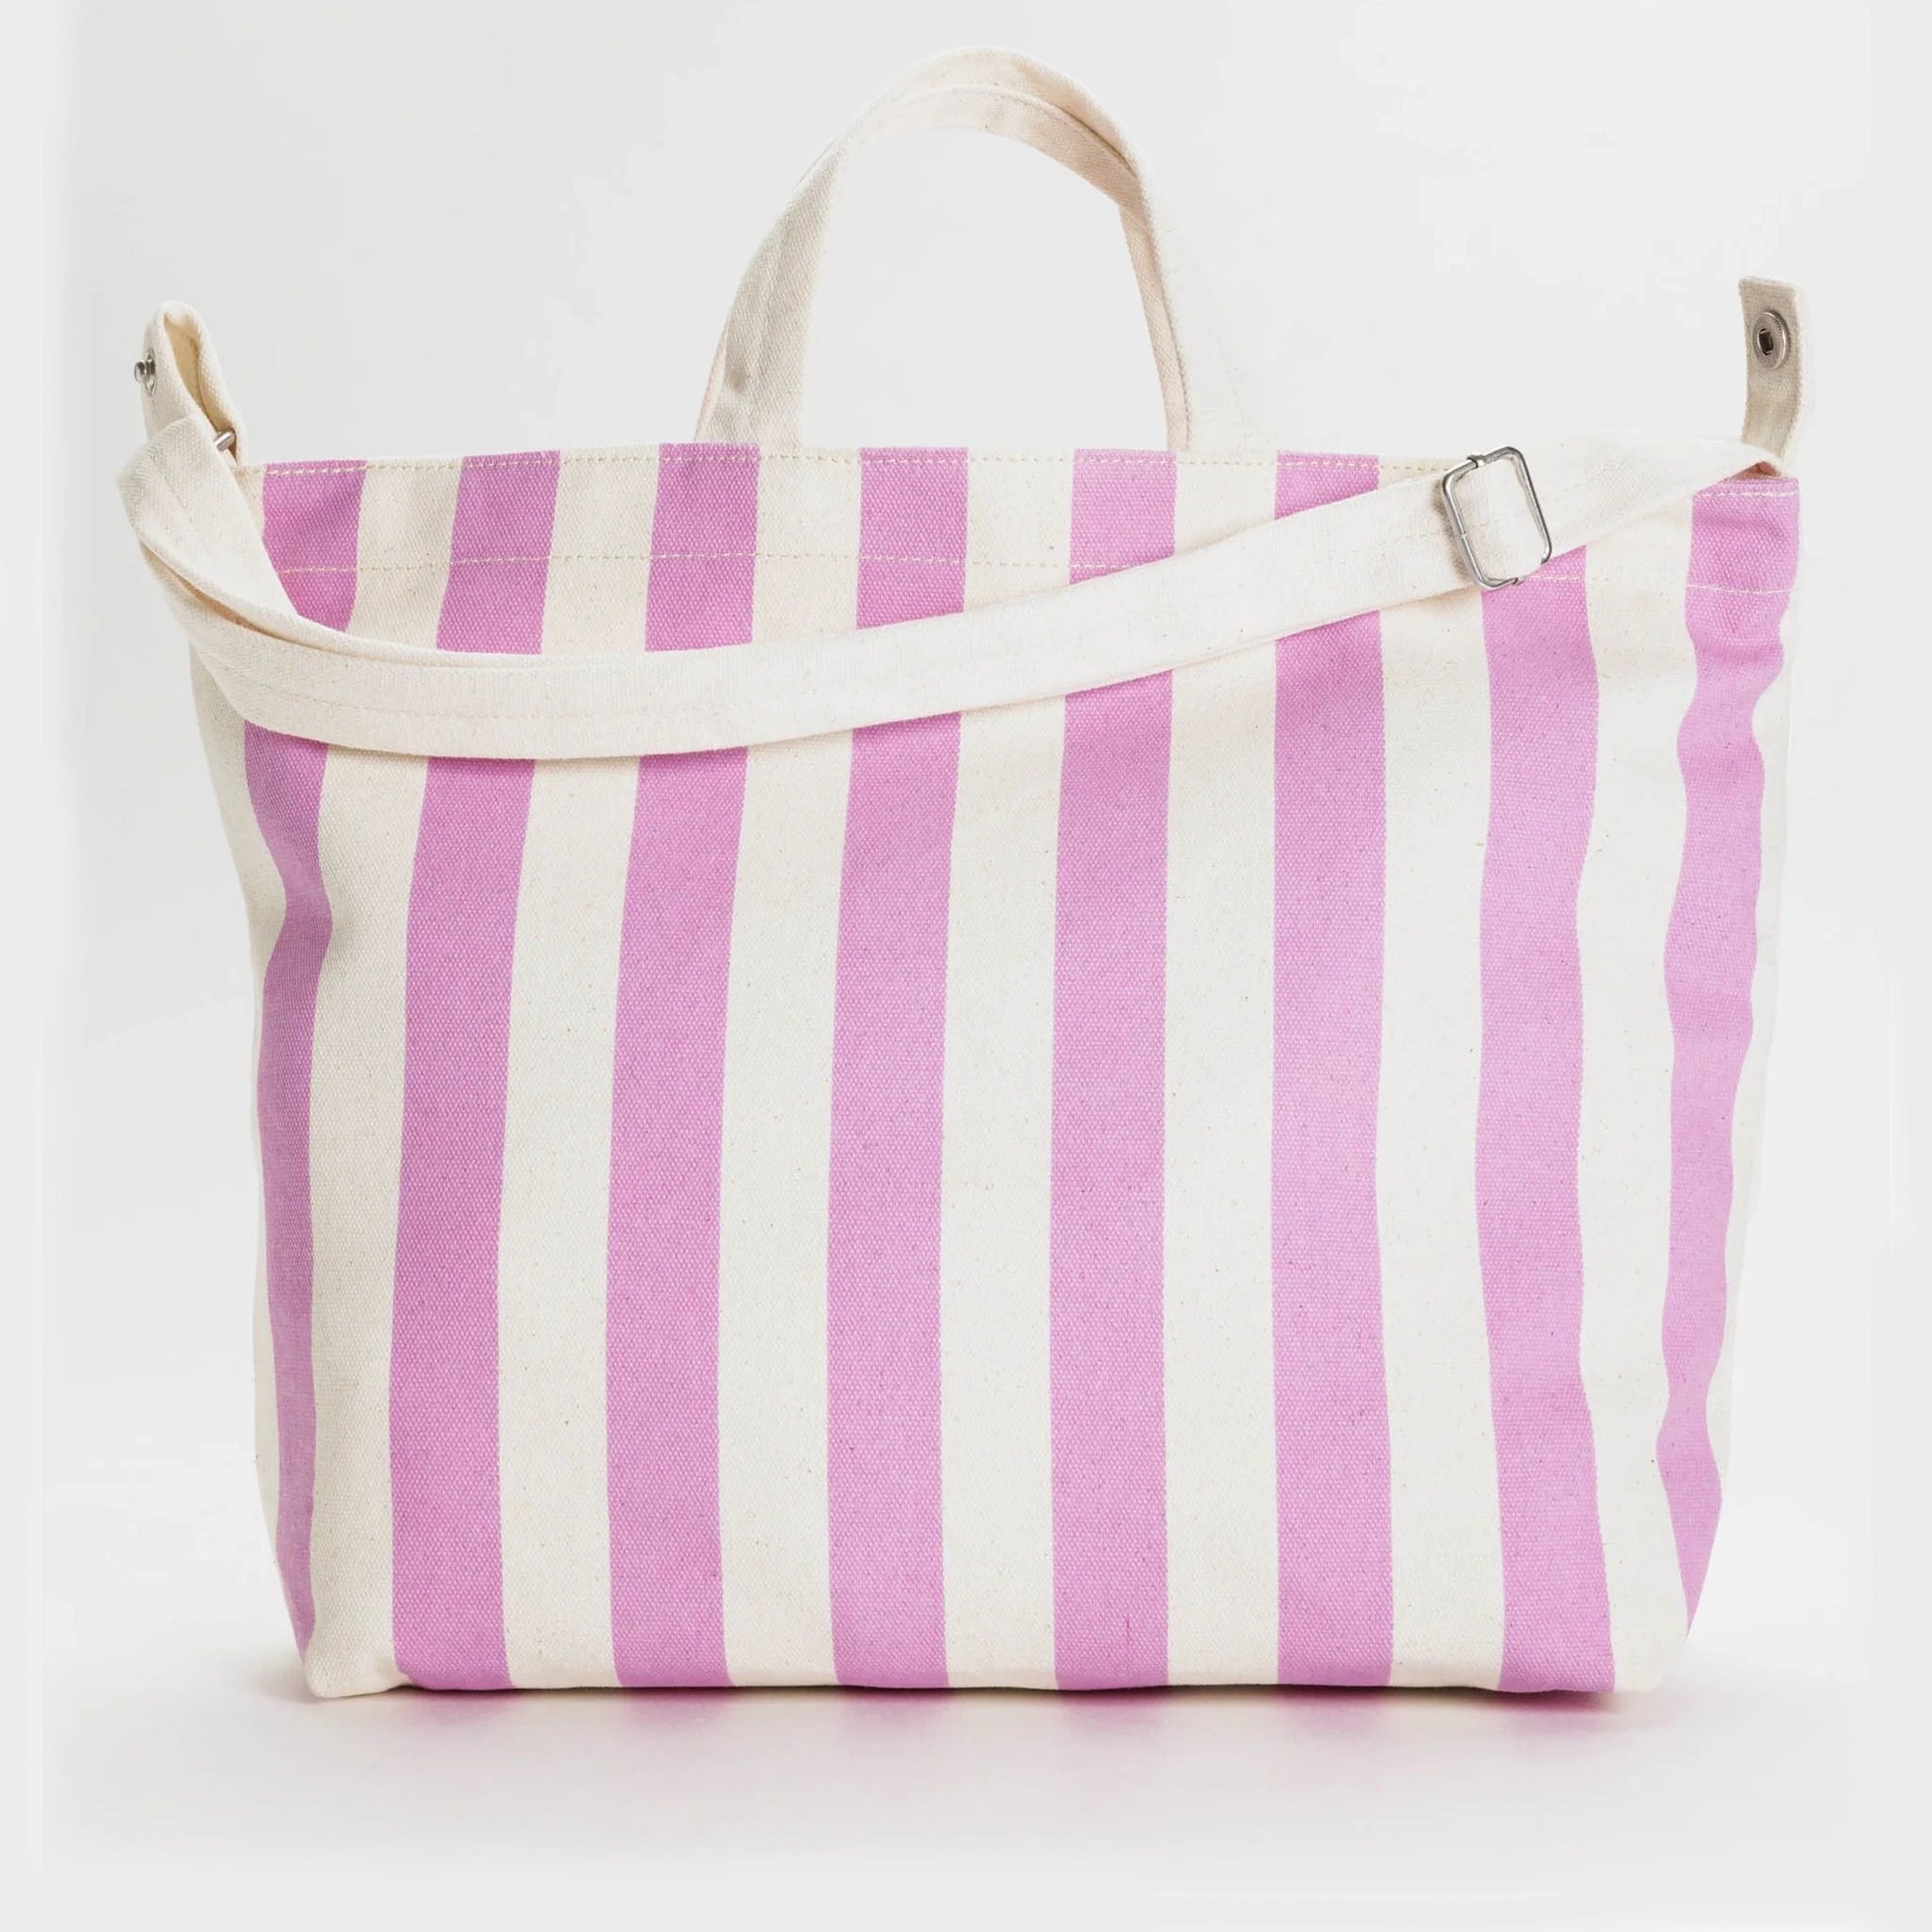 On a white background is a square tote bag with white and hot pink stripes along with two handles and a longer crossbody or shoulder strap. 